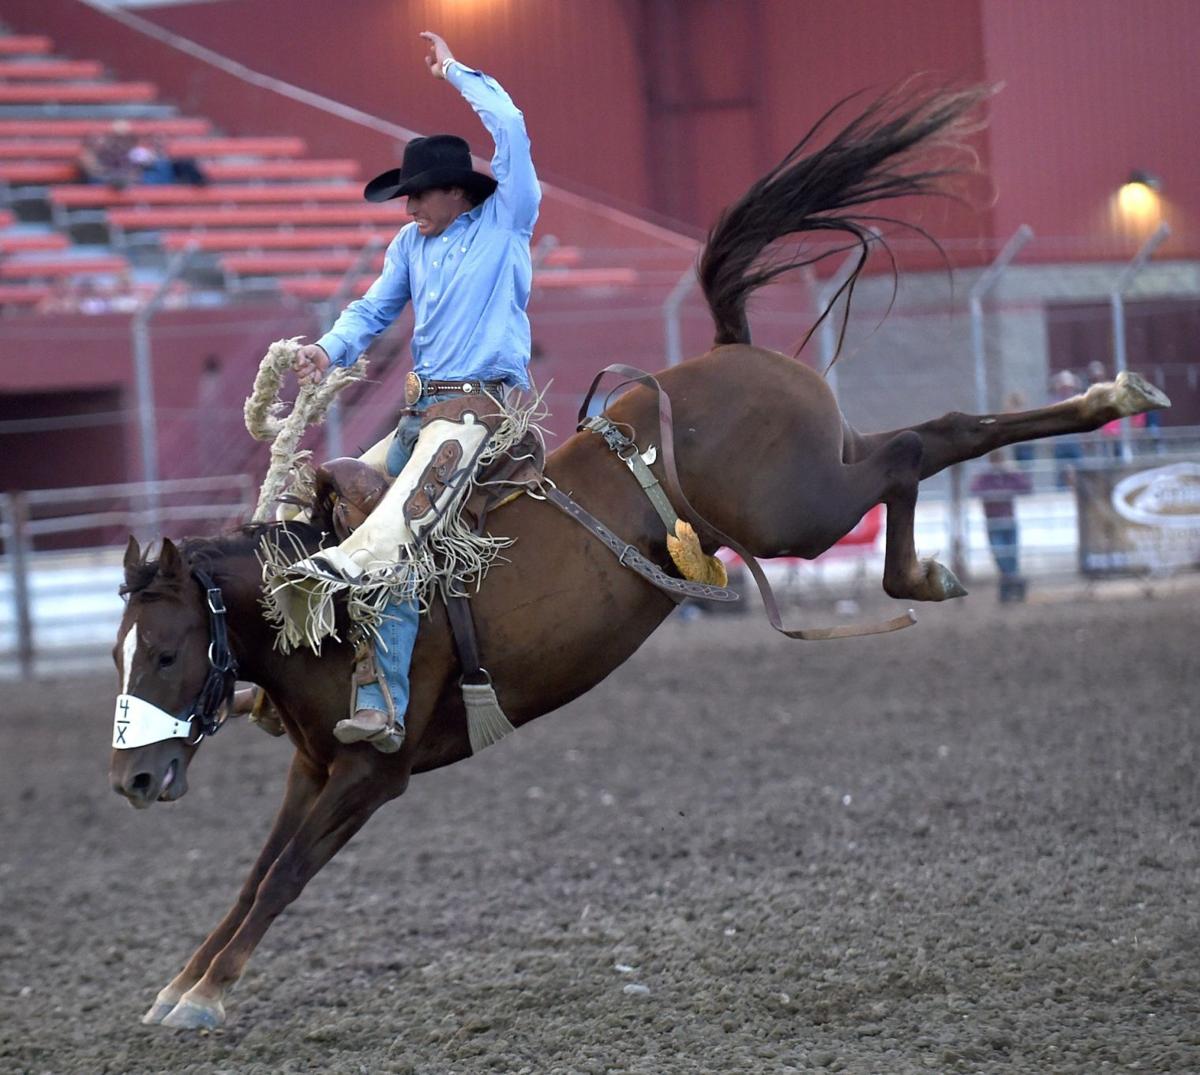 Cheyenne Frontier Days officials have mishandled horse racing proposal, Opinion